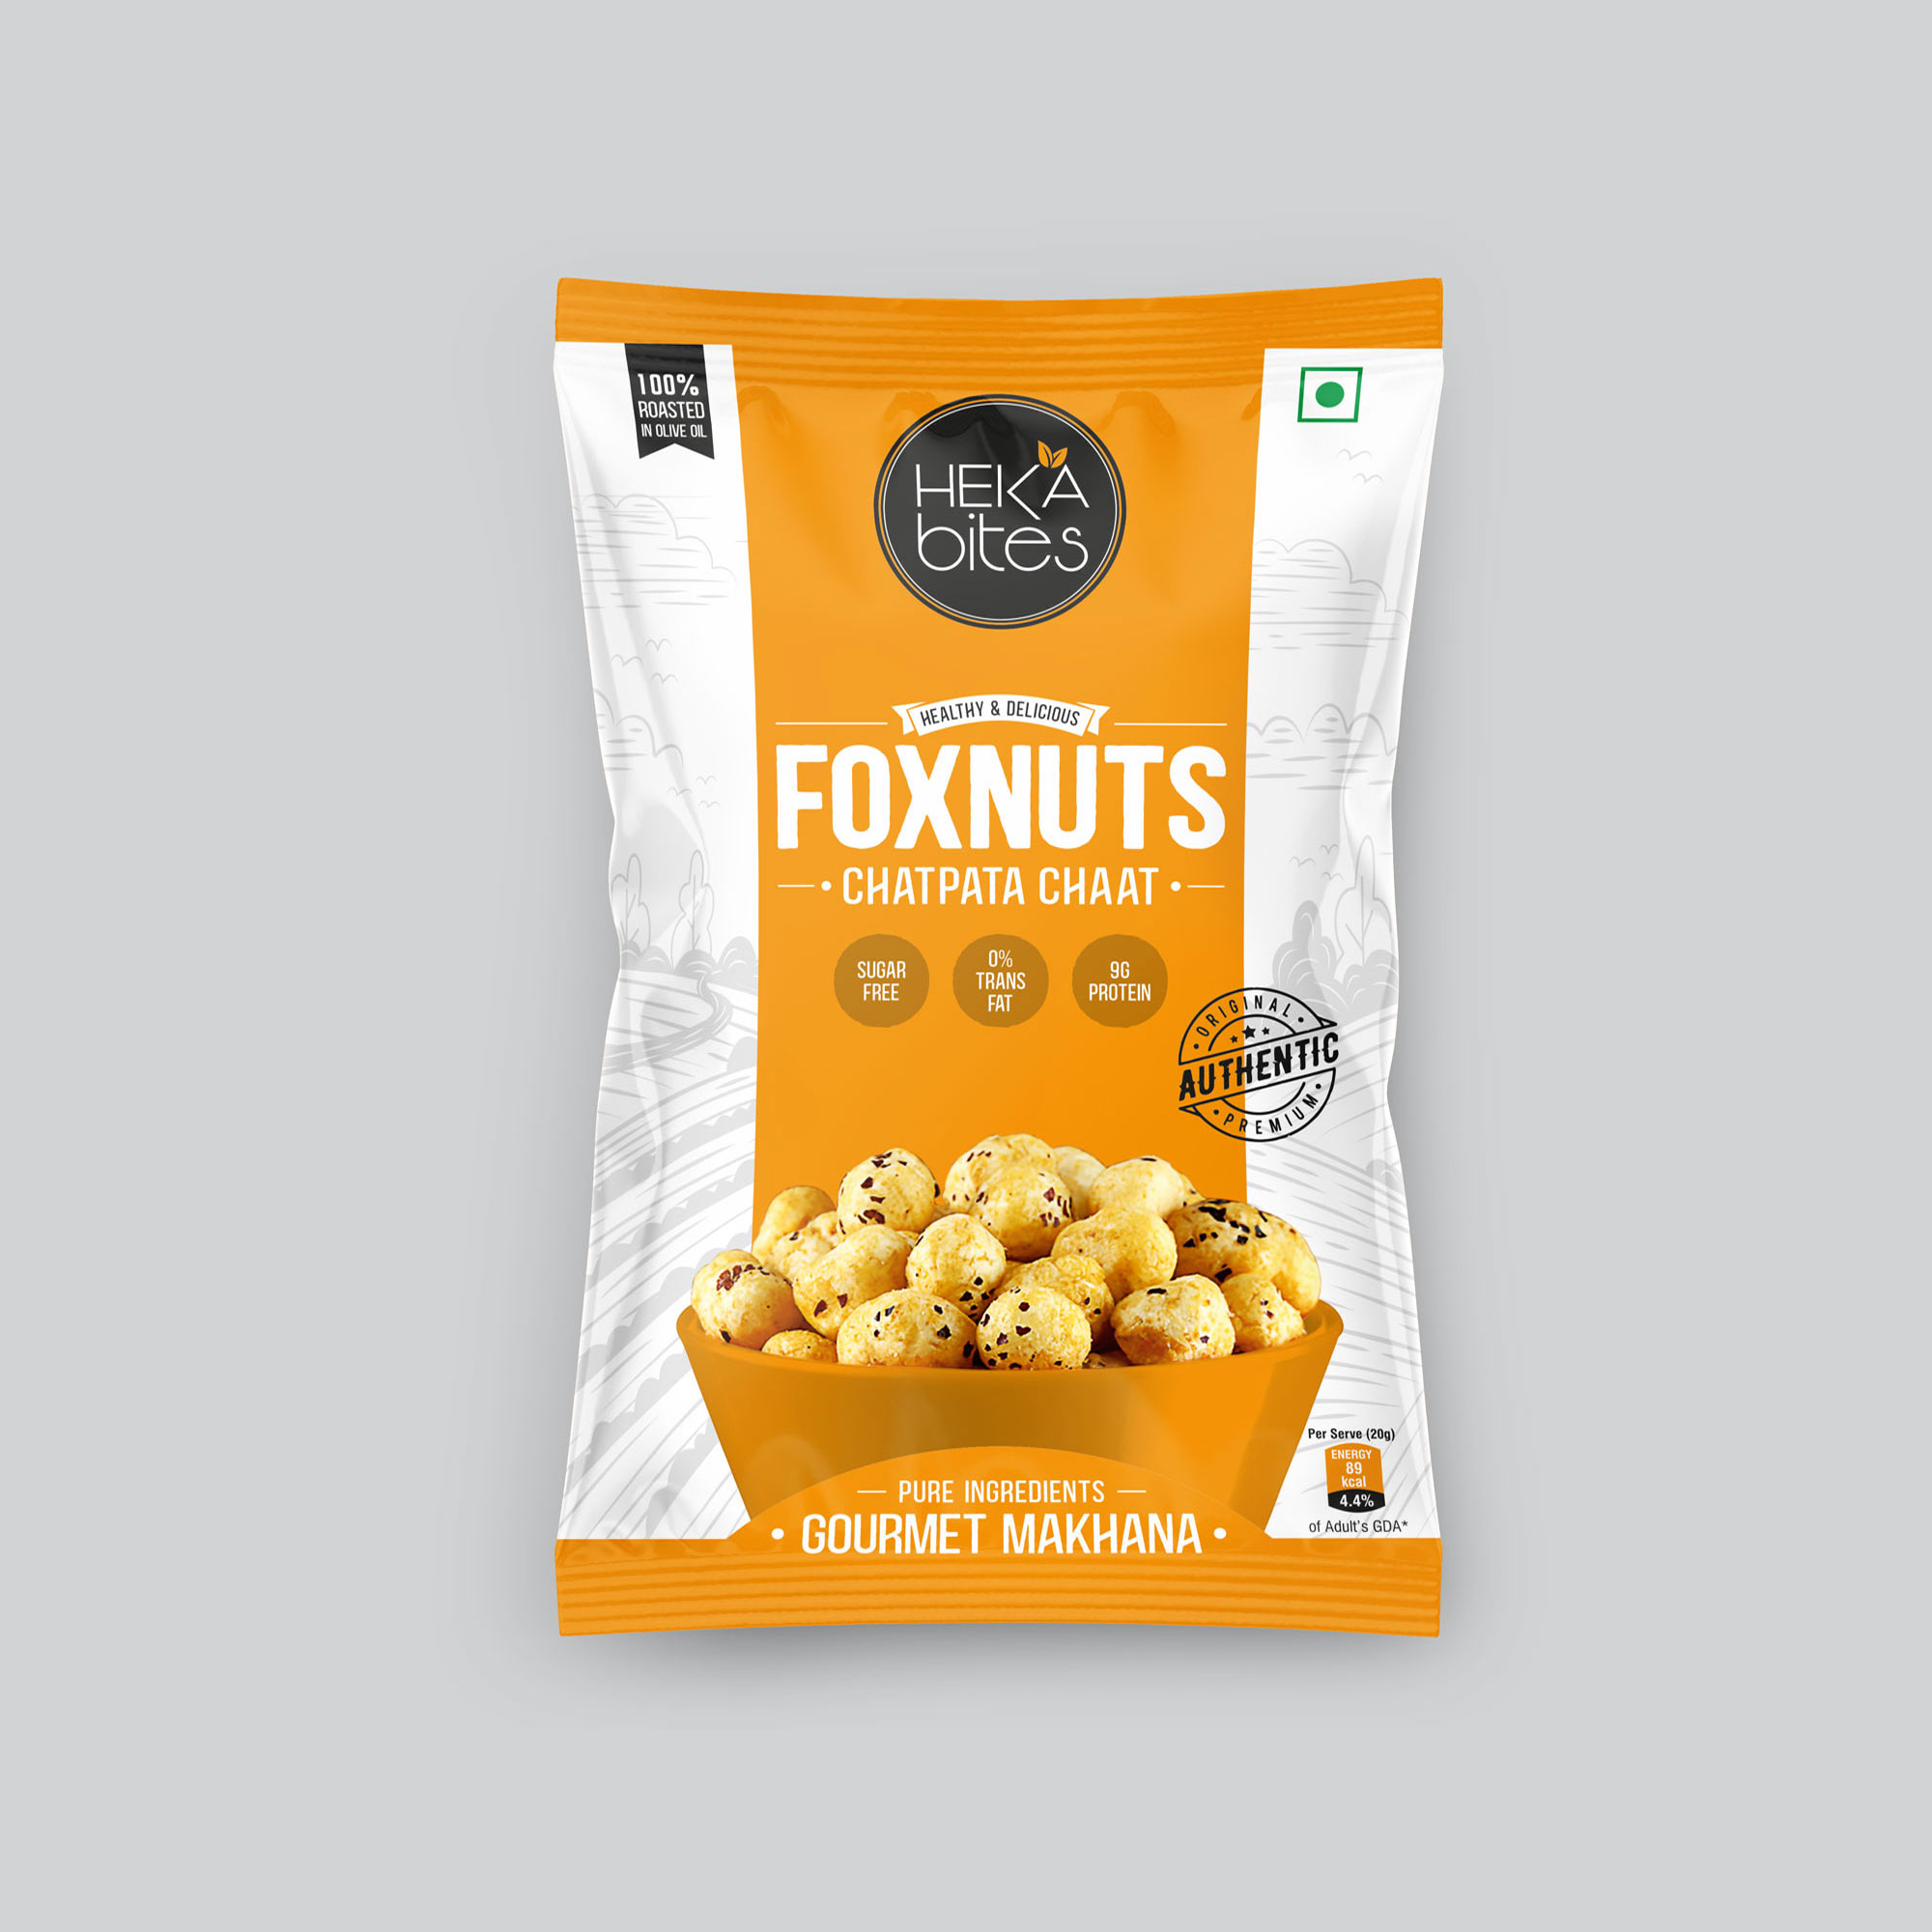 Heka Bites Roasted Fox Nuts Chatpata Chaat 80g (Pack of 2)